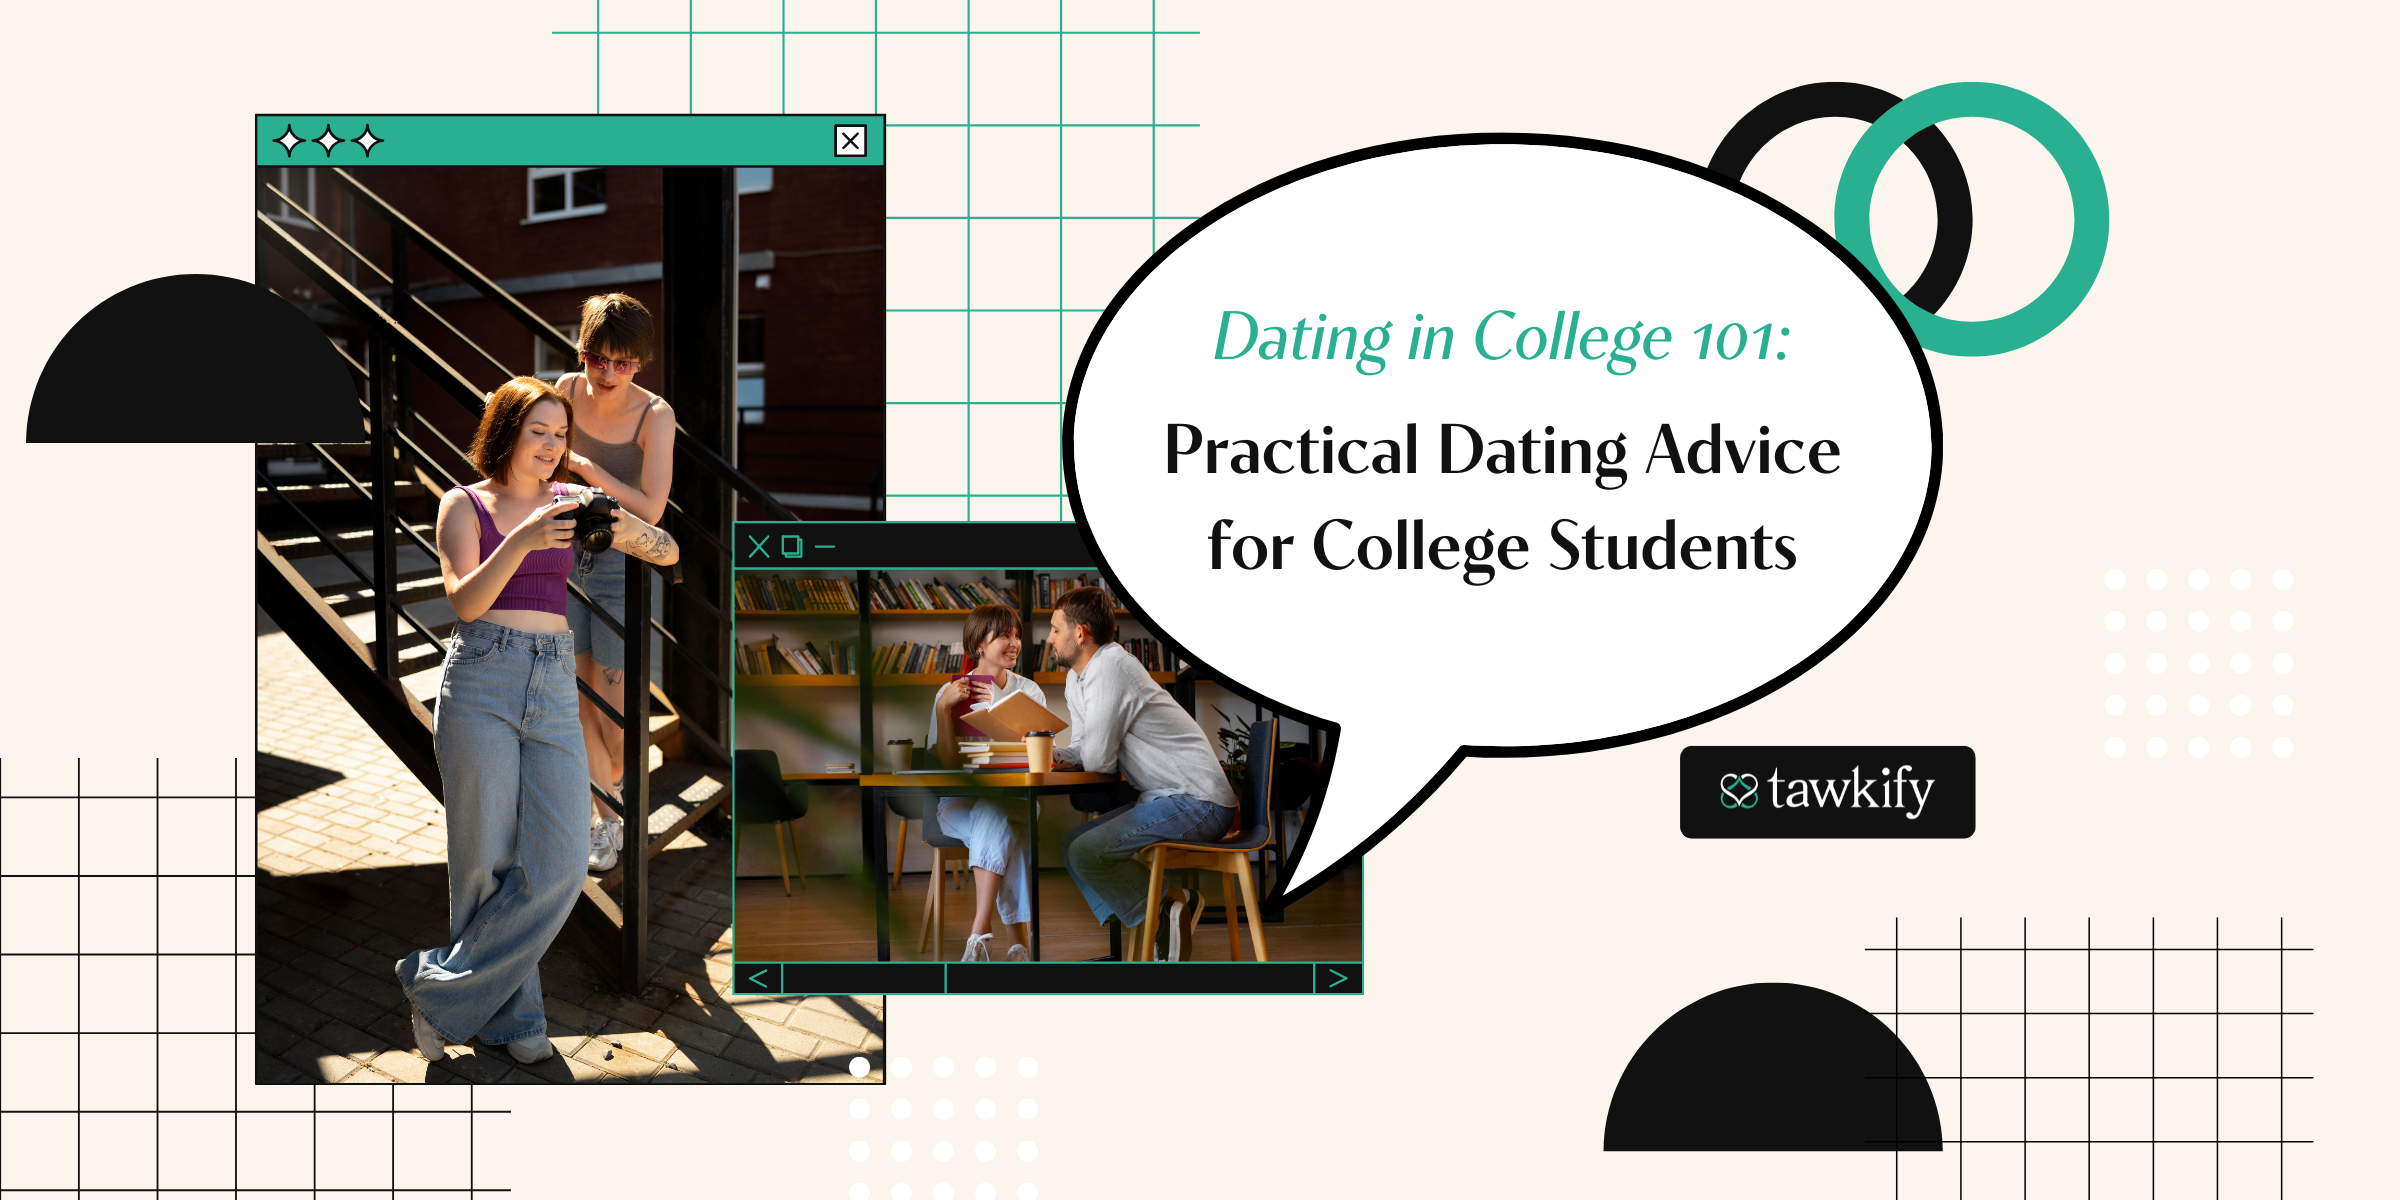 Why is dating in college so hard? It doesn’t have to be! Follow our guide on dating in college for all the best dating advice for college students.